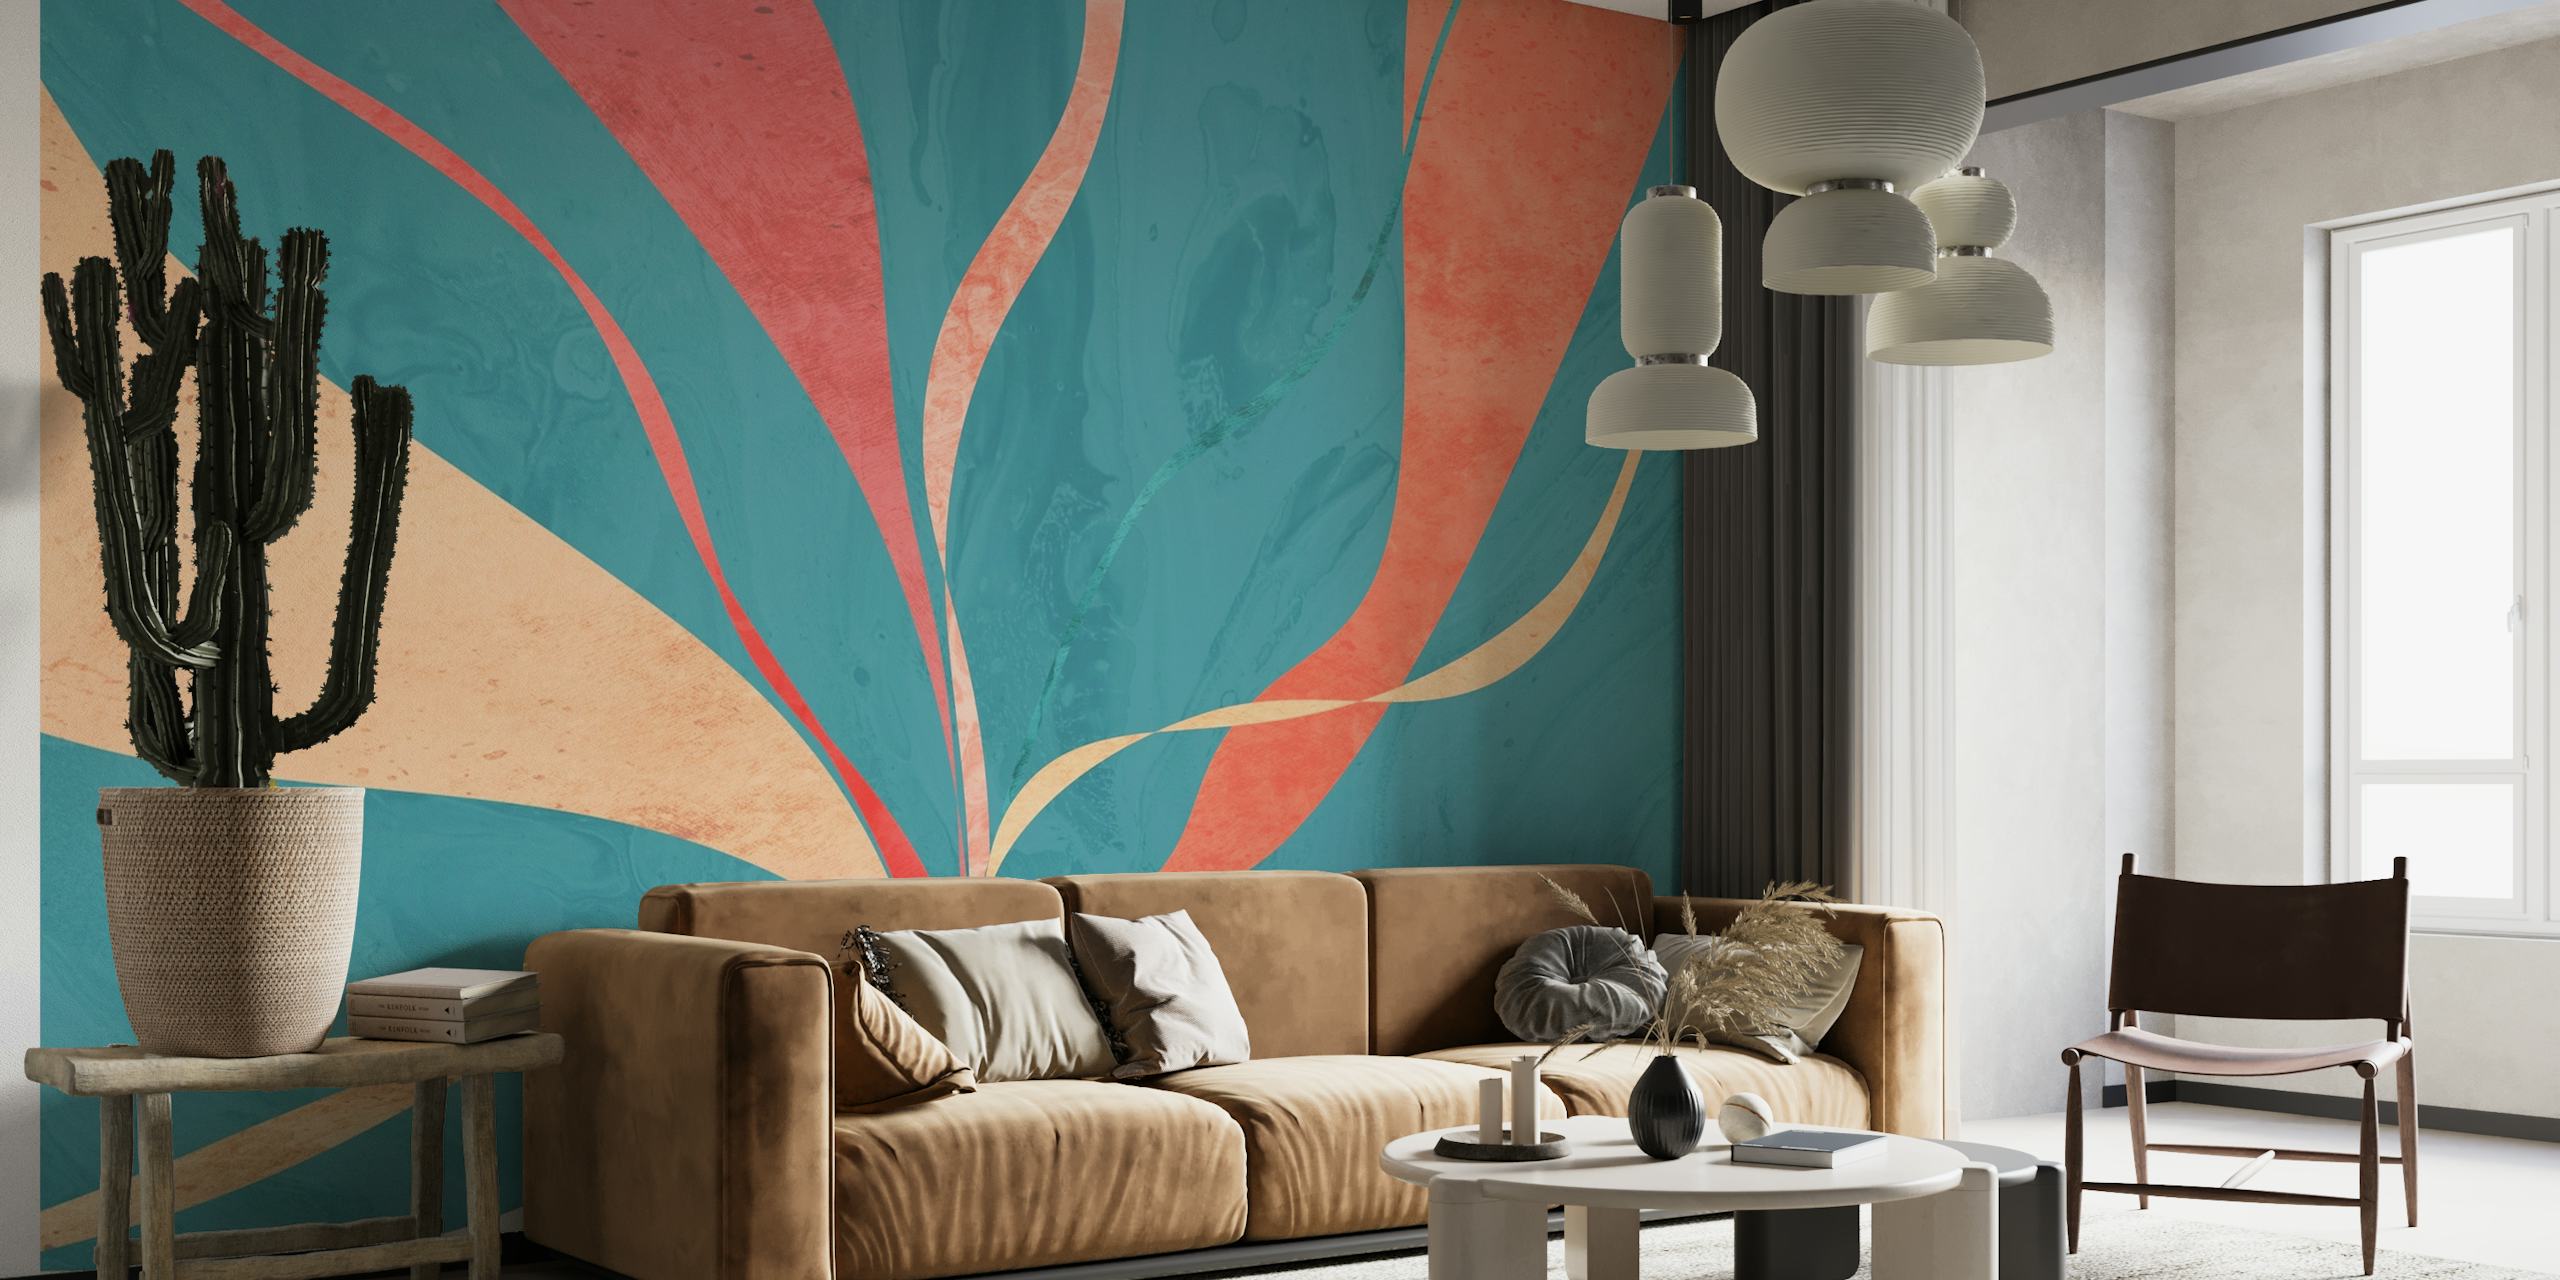 Abstract wall mural with flowing lines in shades of teal, coral, and beige